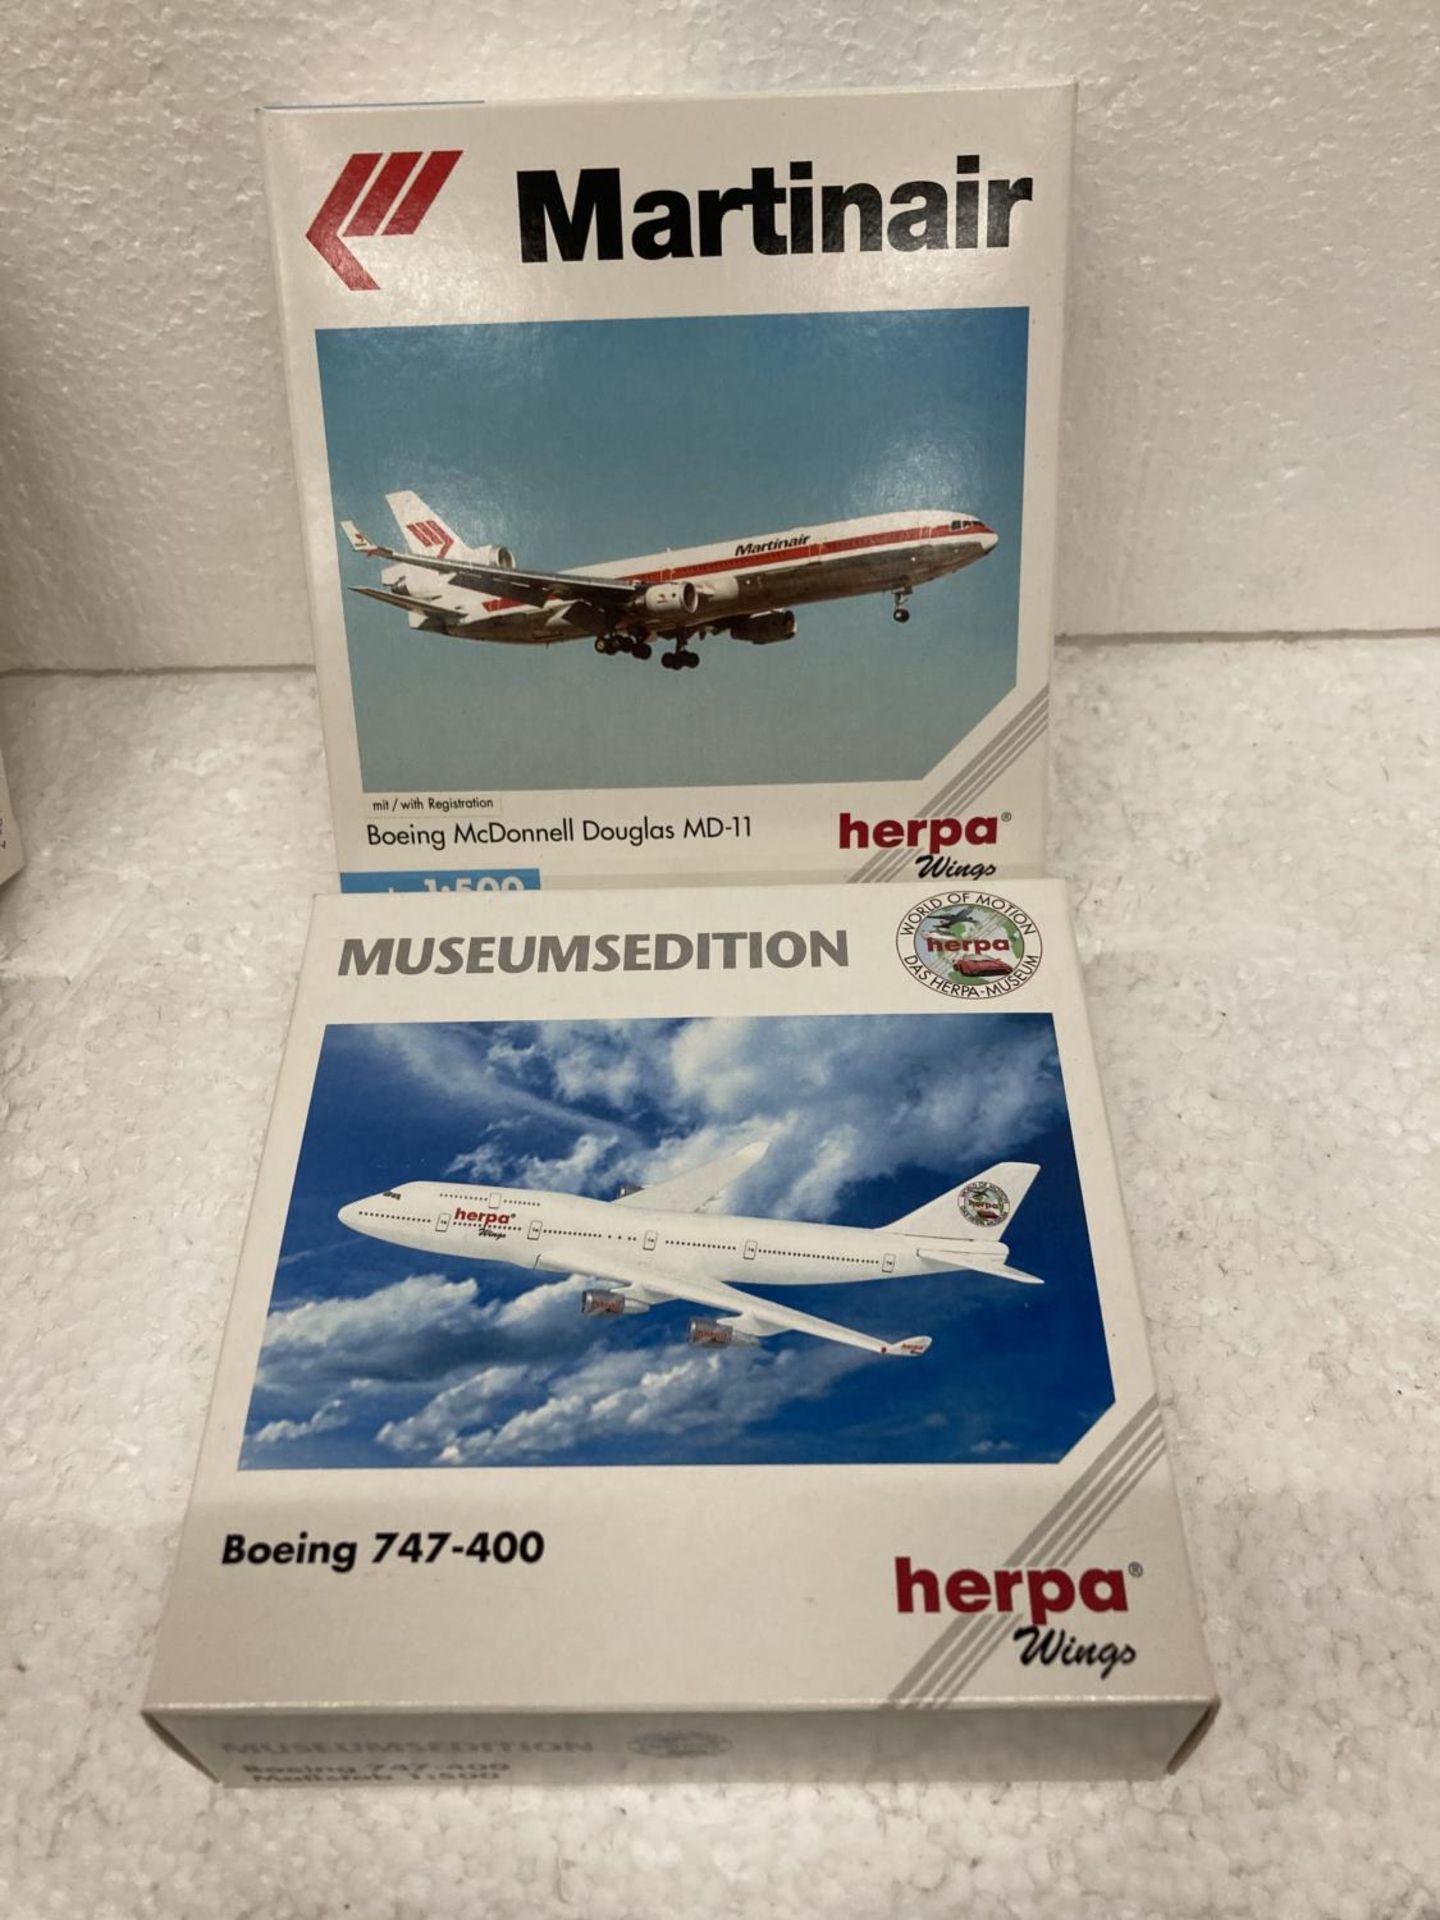 FOUR HERPA WINGS COLLECTION PLANES - SCALE 1:500 - Image 3 of 3